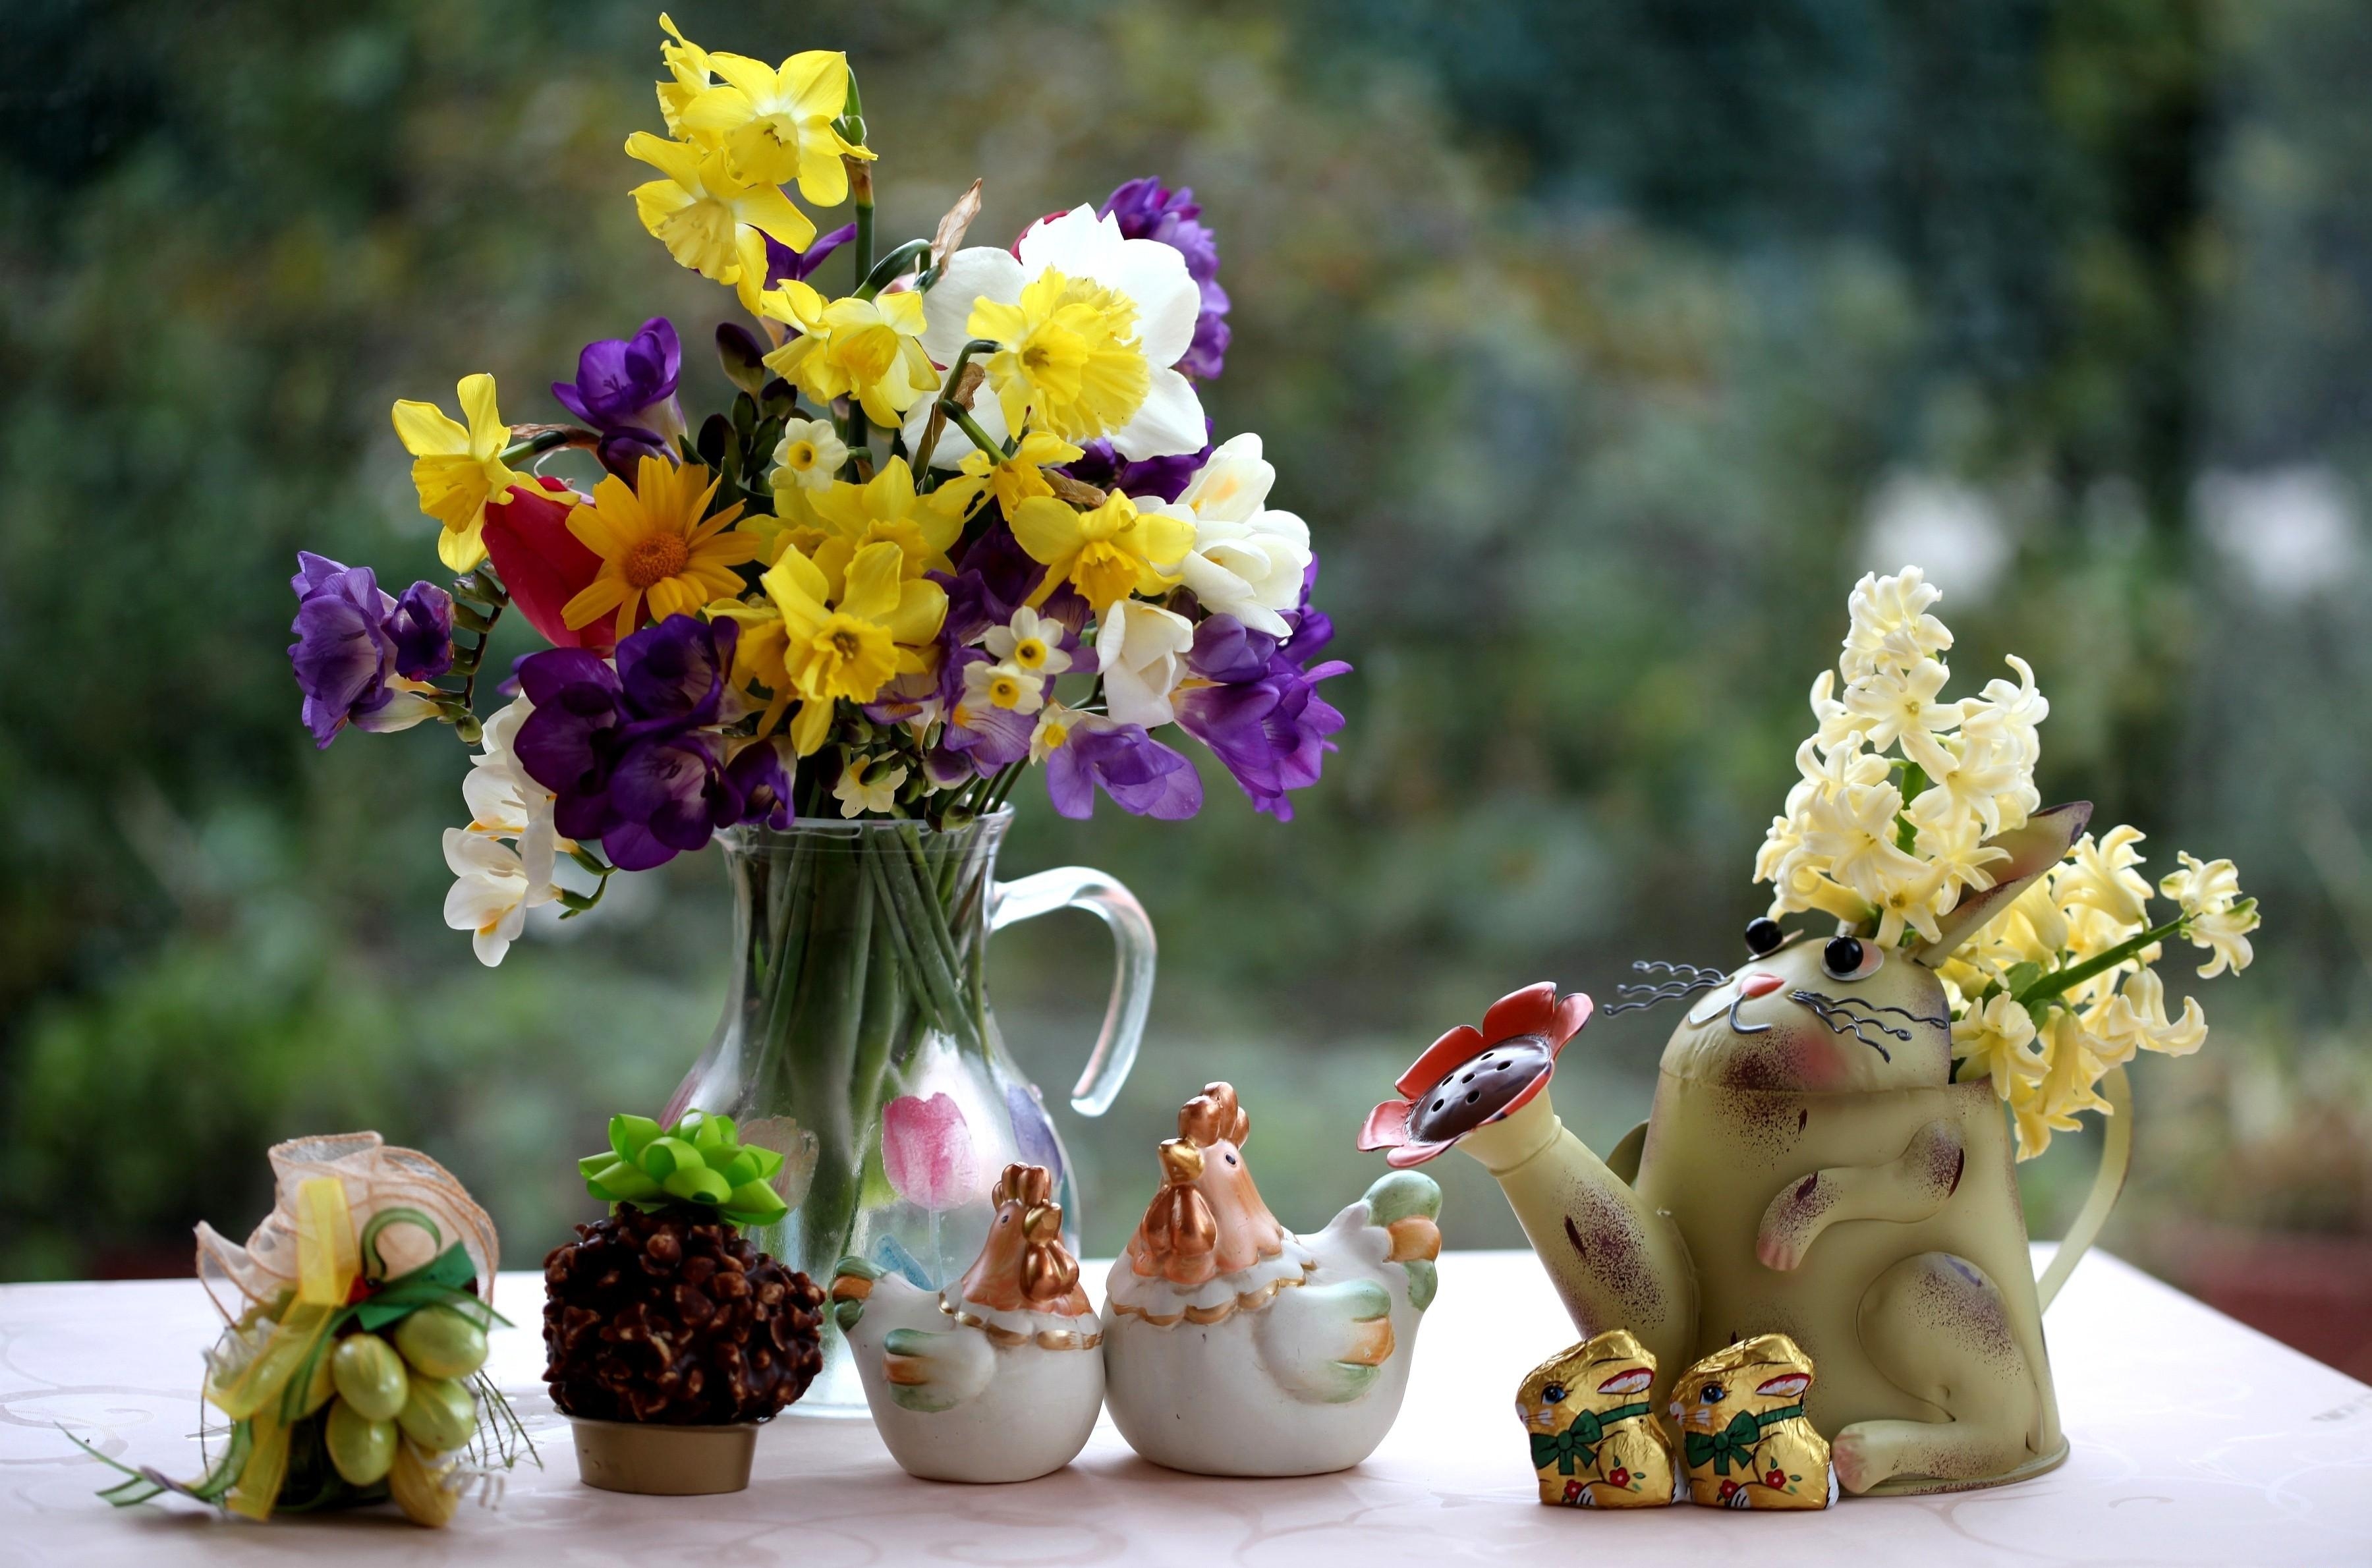 rabbits, narcissussi, flowers, grapes, bouquet, tulip, chicken, freesia